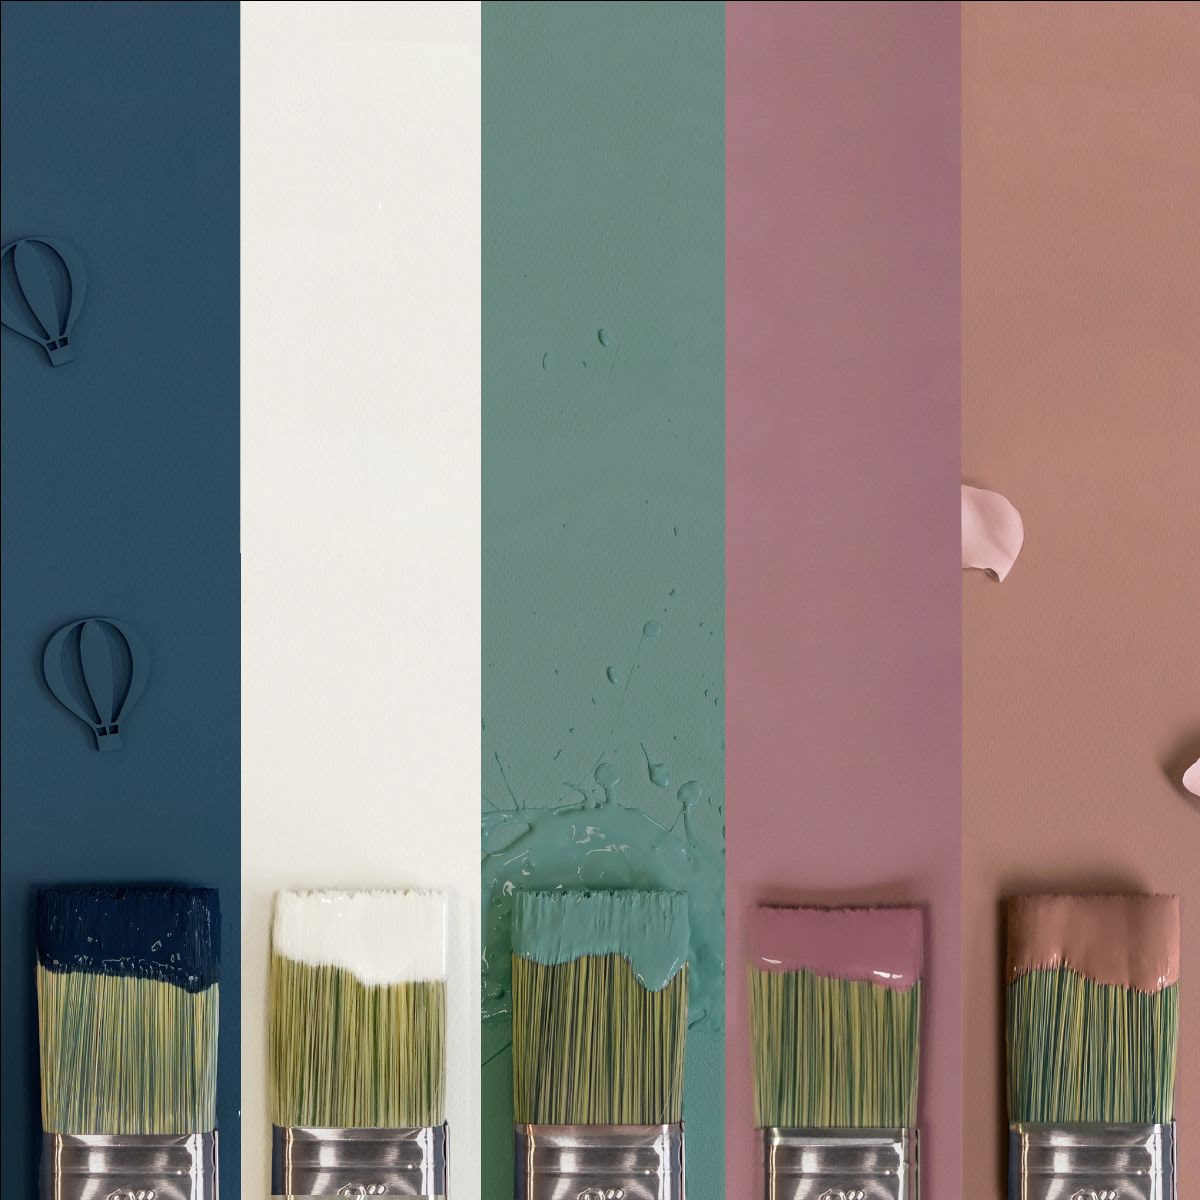 A photo of five paint colours in stripes, with paintbrushes underneath the stripes.